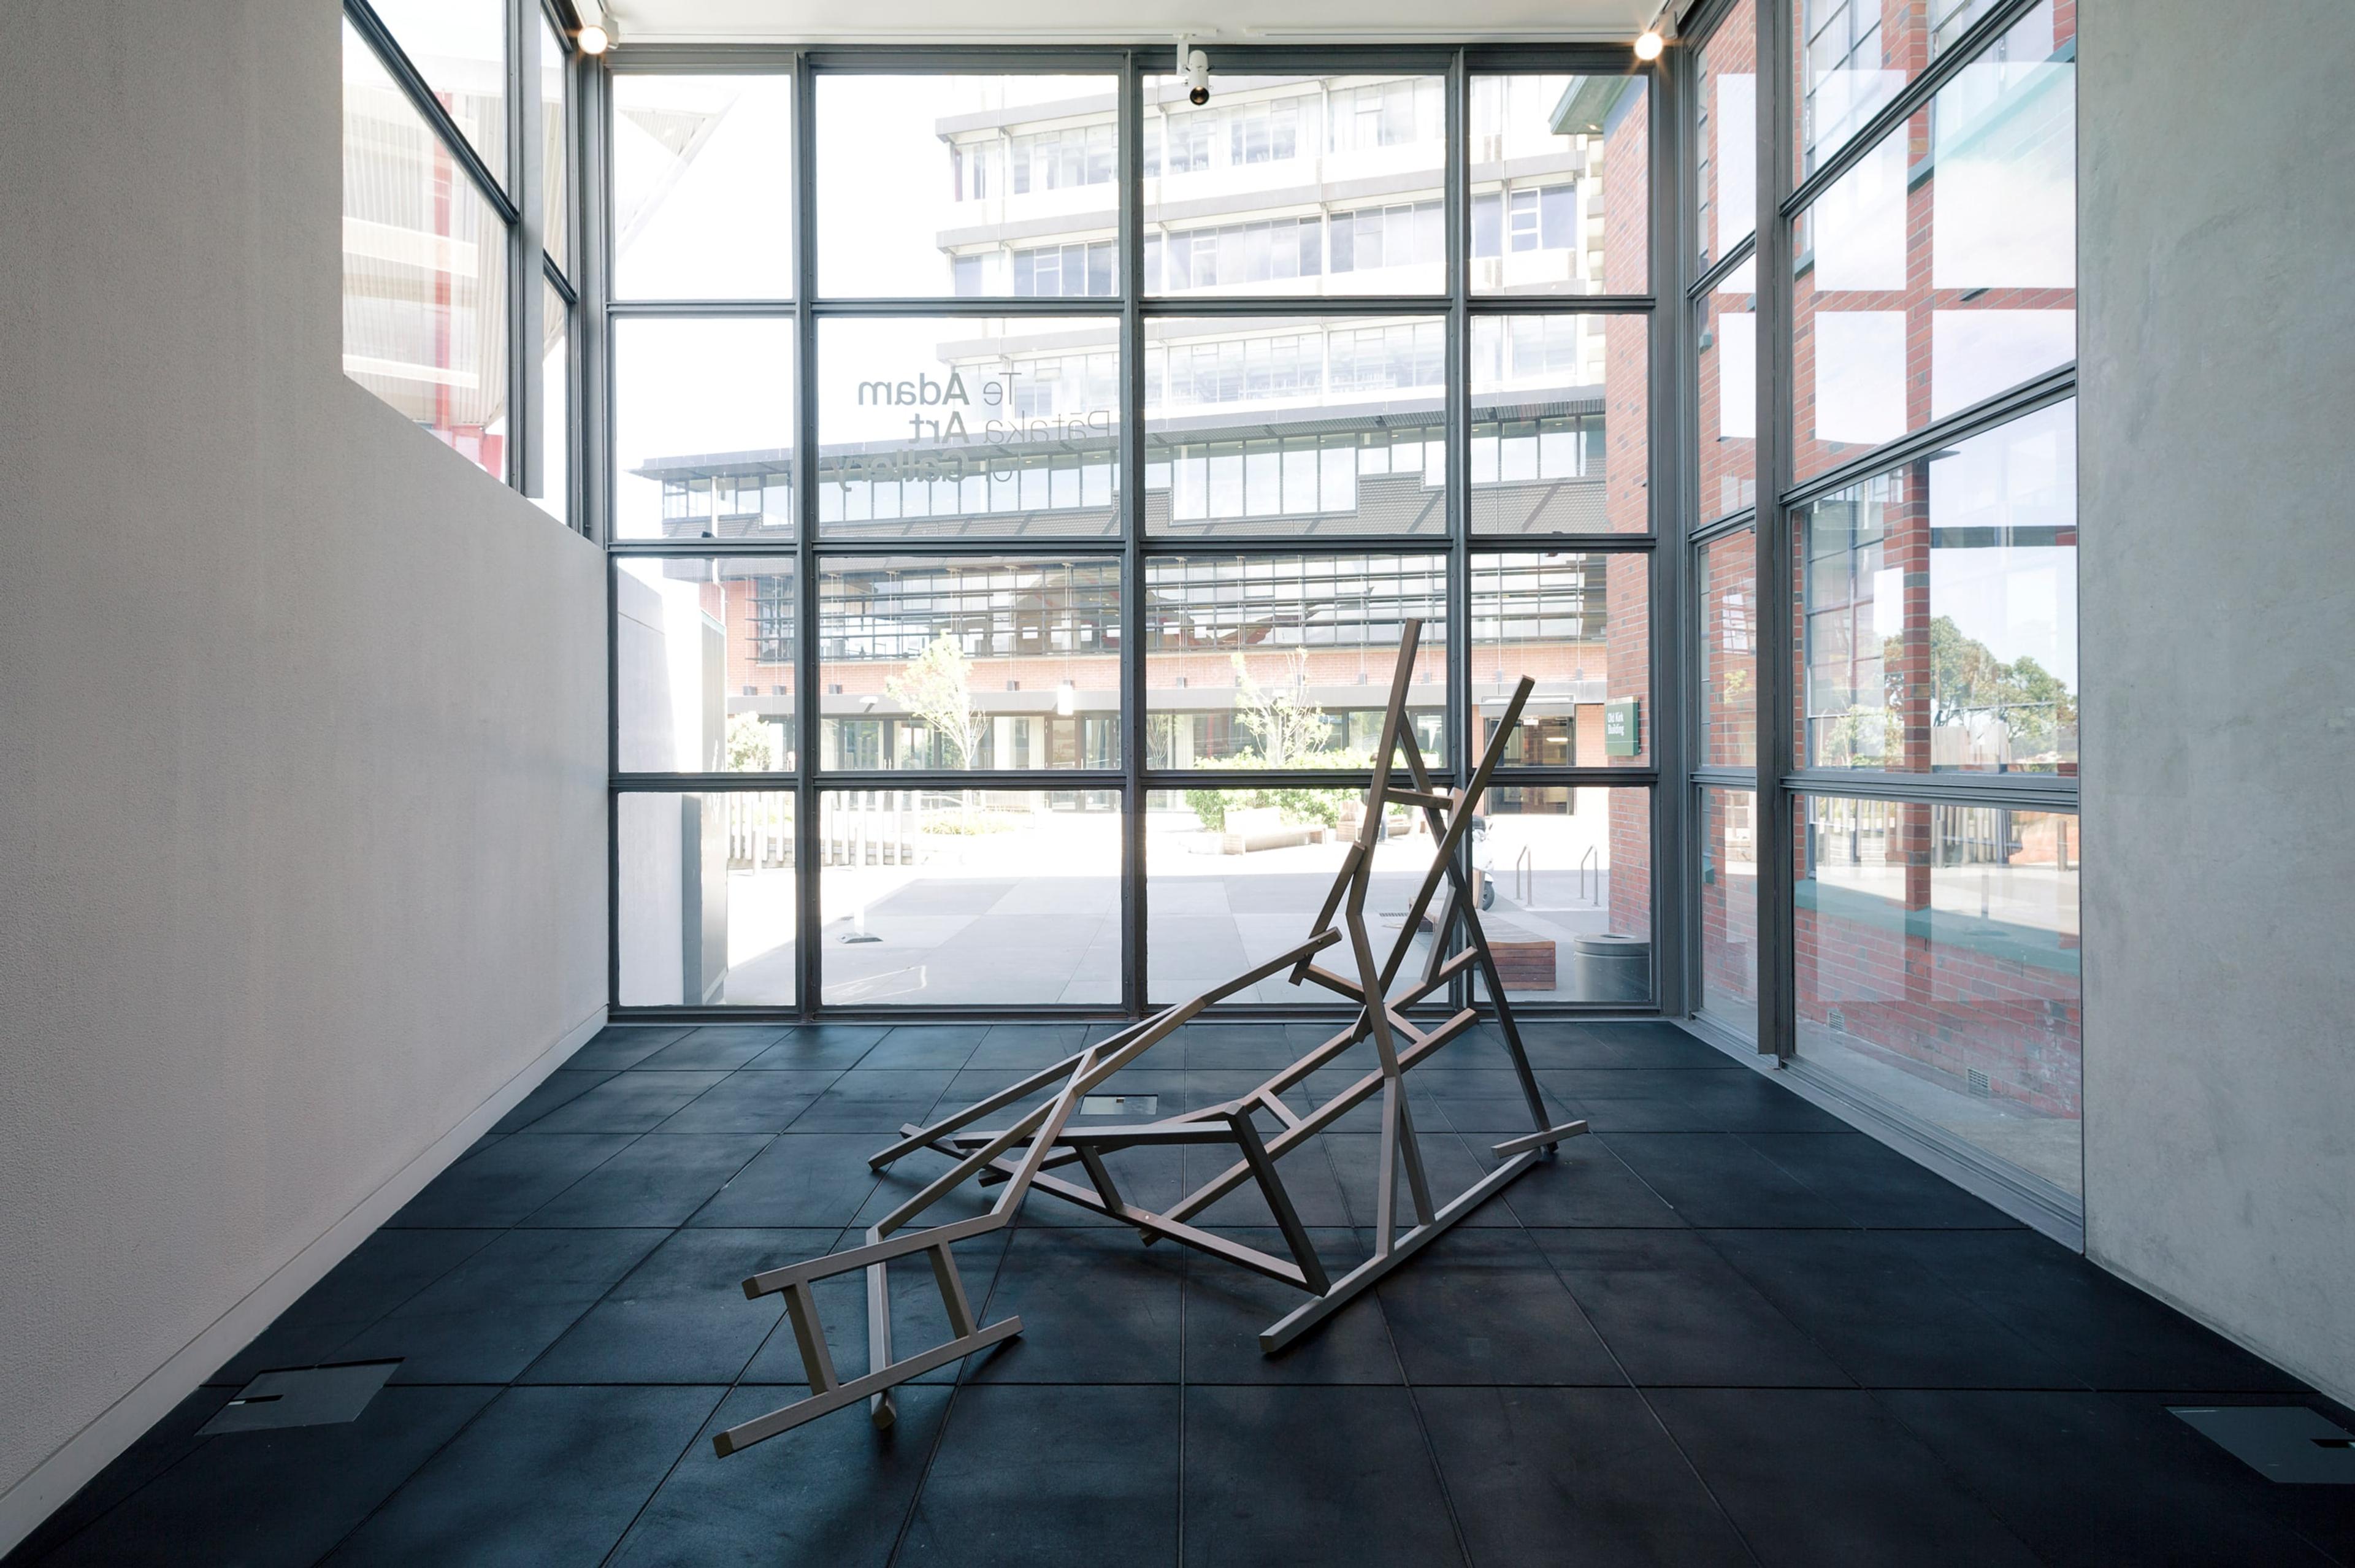 Installation view of John Panting: Spatial Constructions at the Adam Art Gallery, showing 5.12 (Untitled V) , 1972–73, steel, 183 x 305 x 152cm. Collection of Christchurch Art Gallery Te Puna o Waiwhetu. Photo: Shaun Waugh.